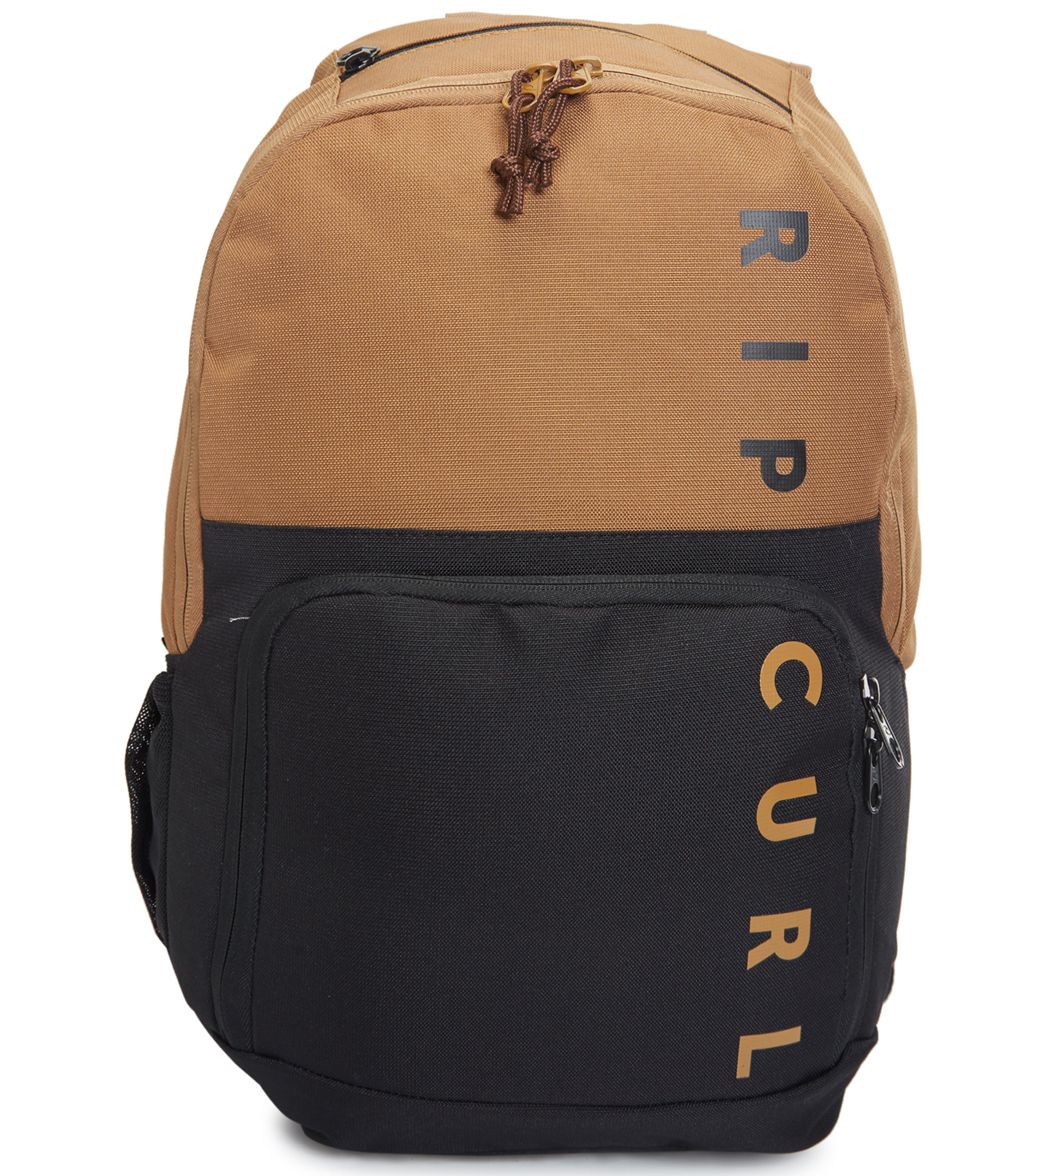 Rip Curl Evo Combined Logo Backpack - Tan One Size - Swimoutlet.com